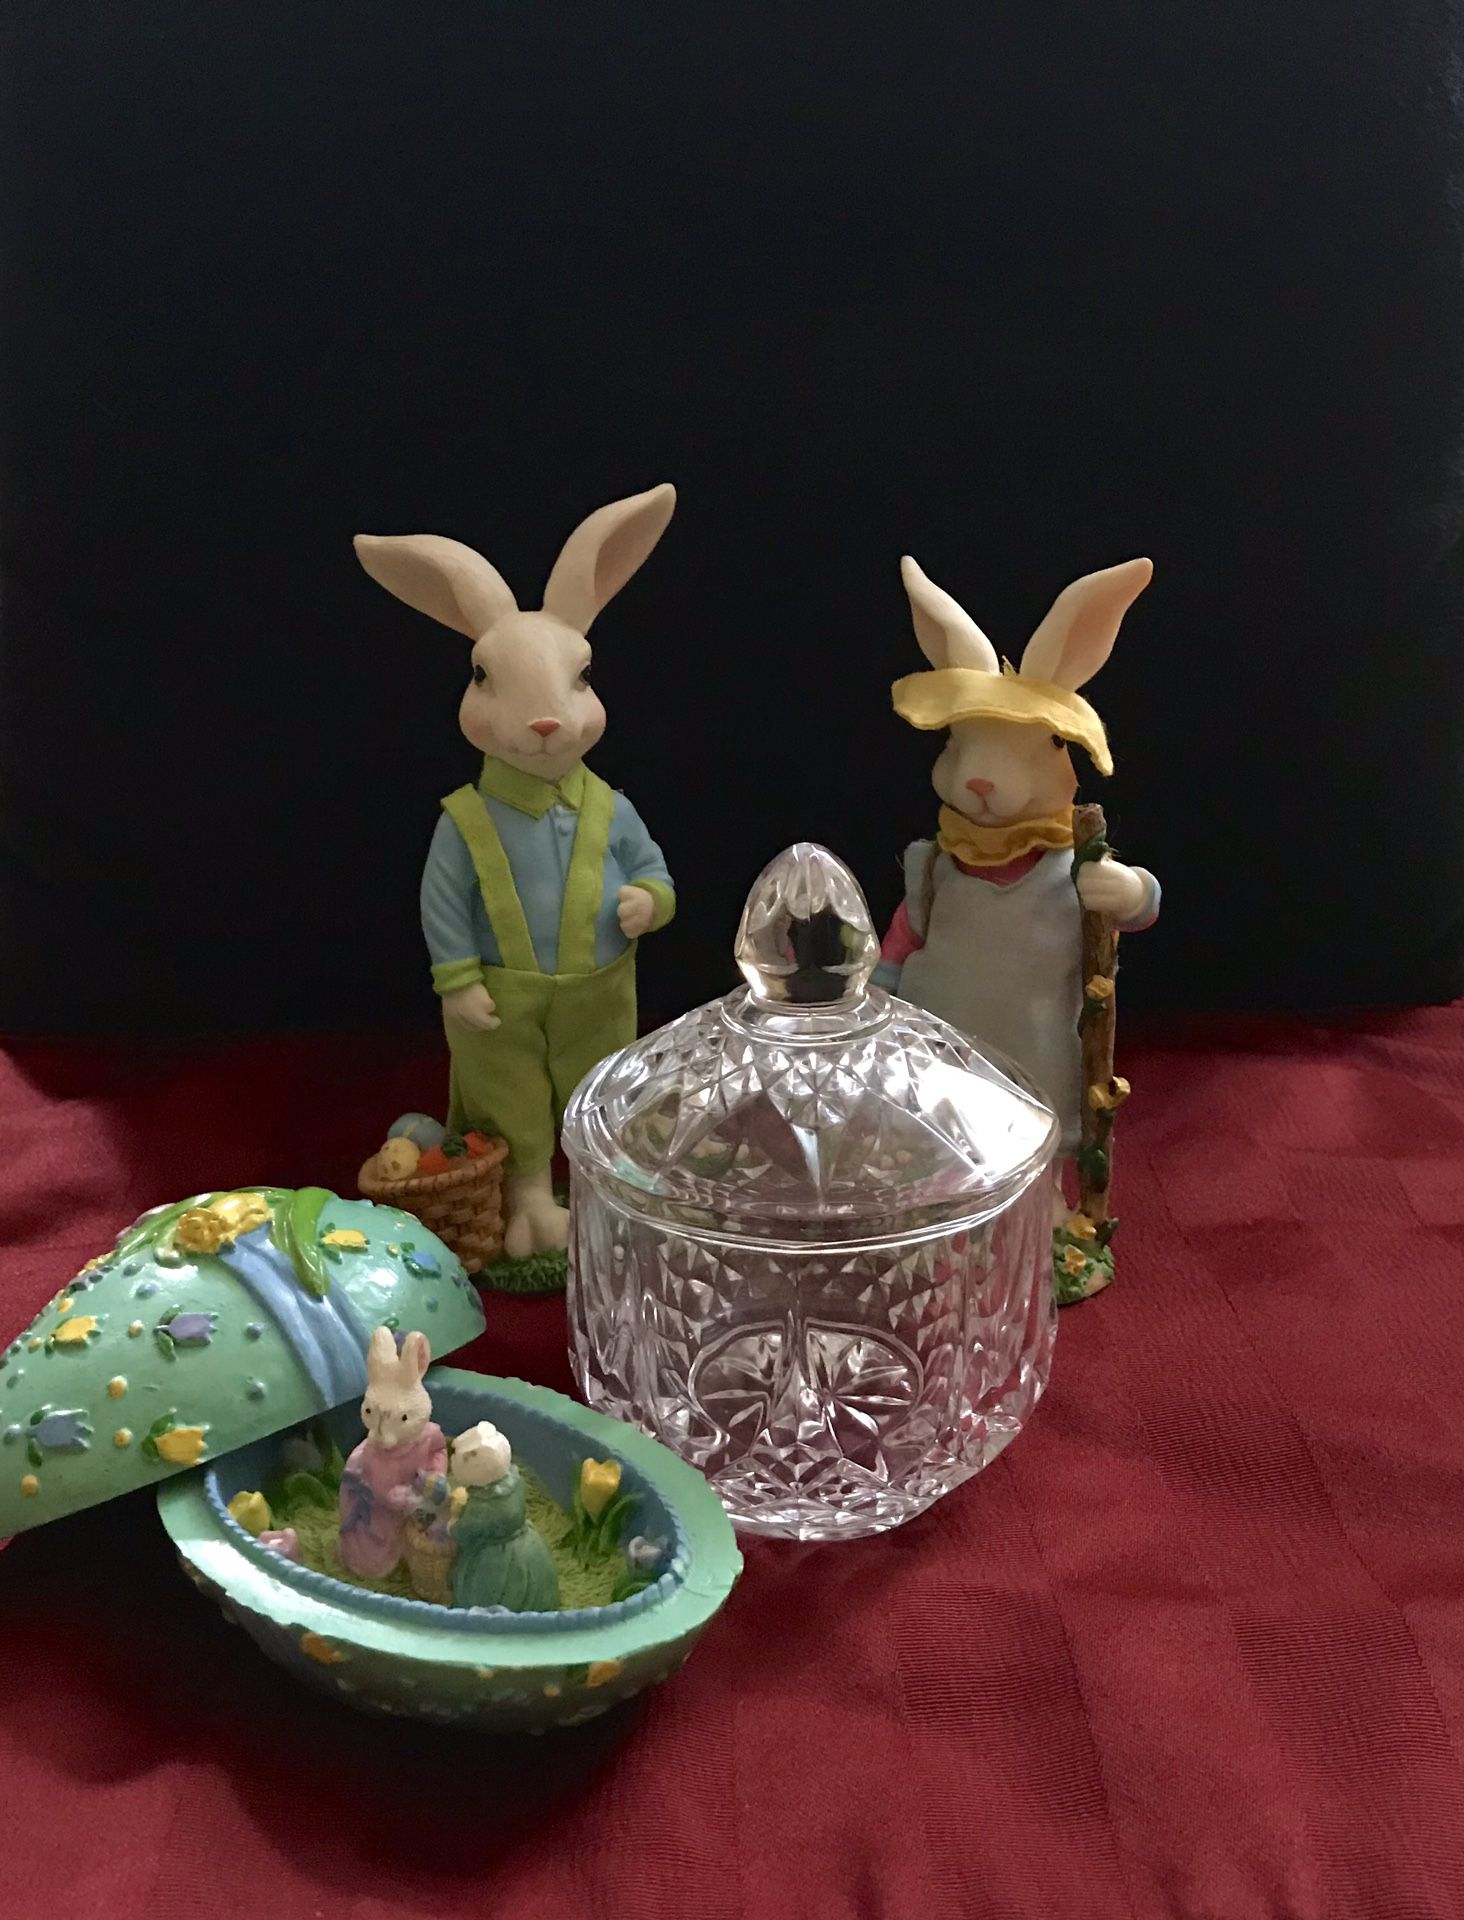 Easter decor (Greenbrier) and candy dish.